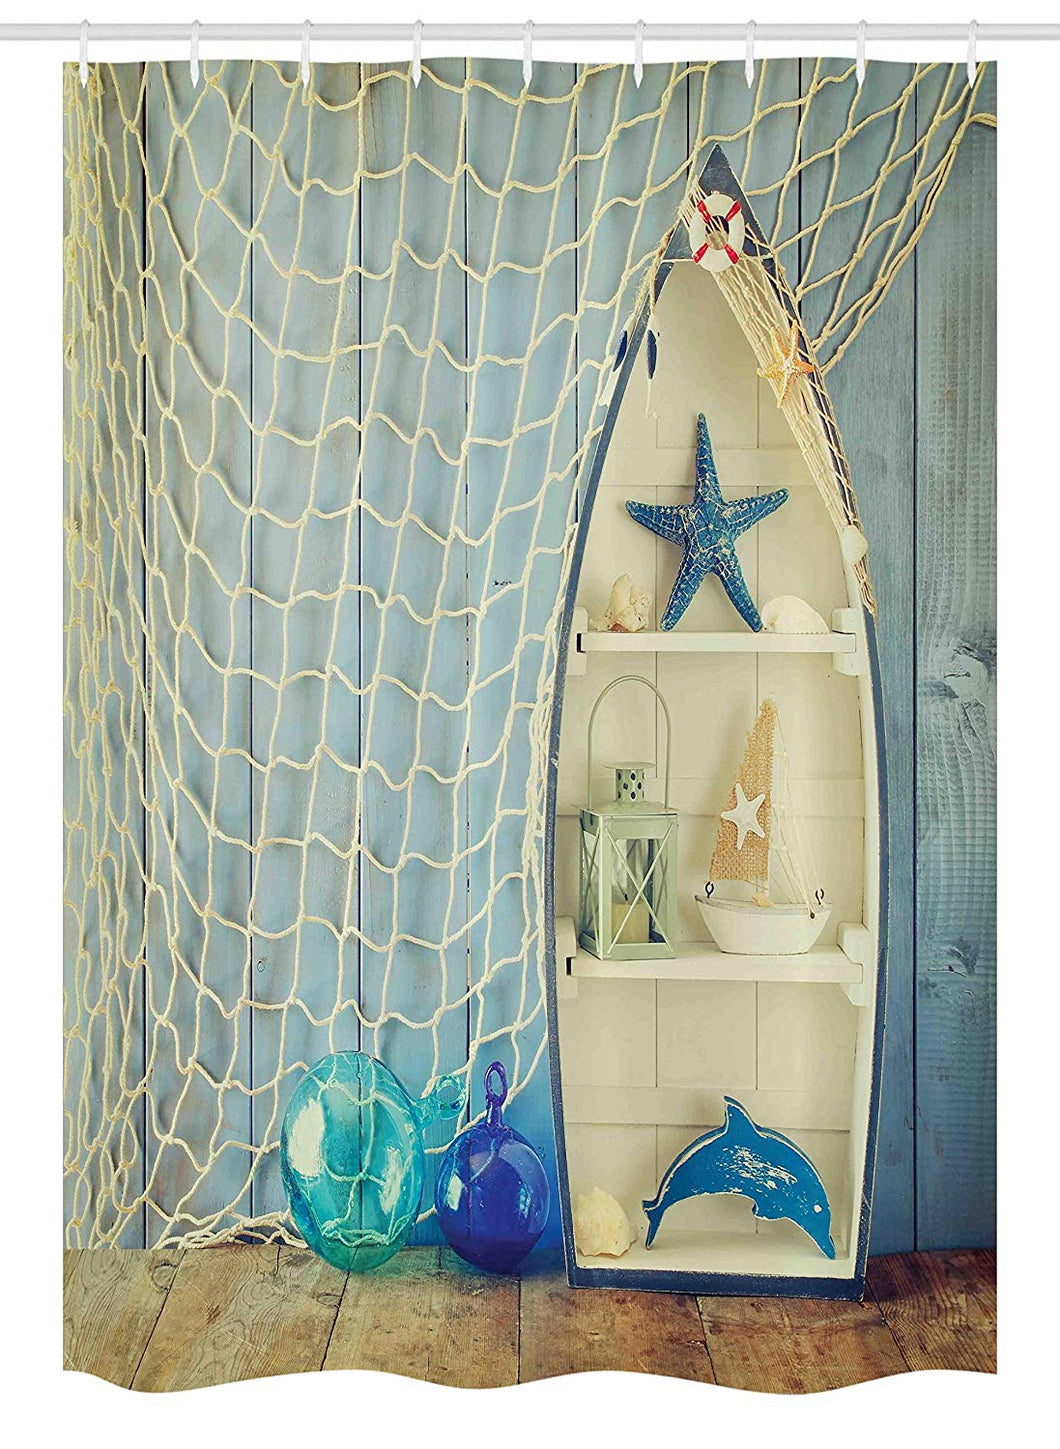 Ambesonne Nautical Stall Shower Curtain, Nautical Boat Standing Against The Wall Other Aquatic Objects Sea Featured Picture, Fabric Bathroom Decor Set with Hooks, 54 W x 78 L Inches, Blue Beige